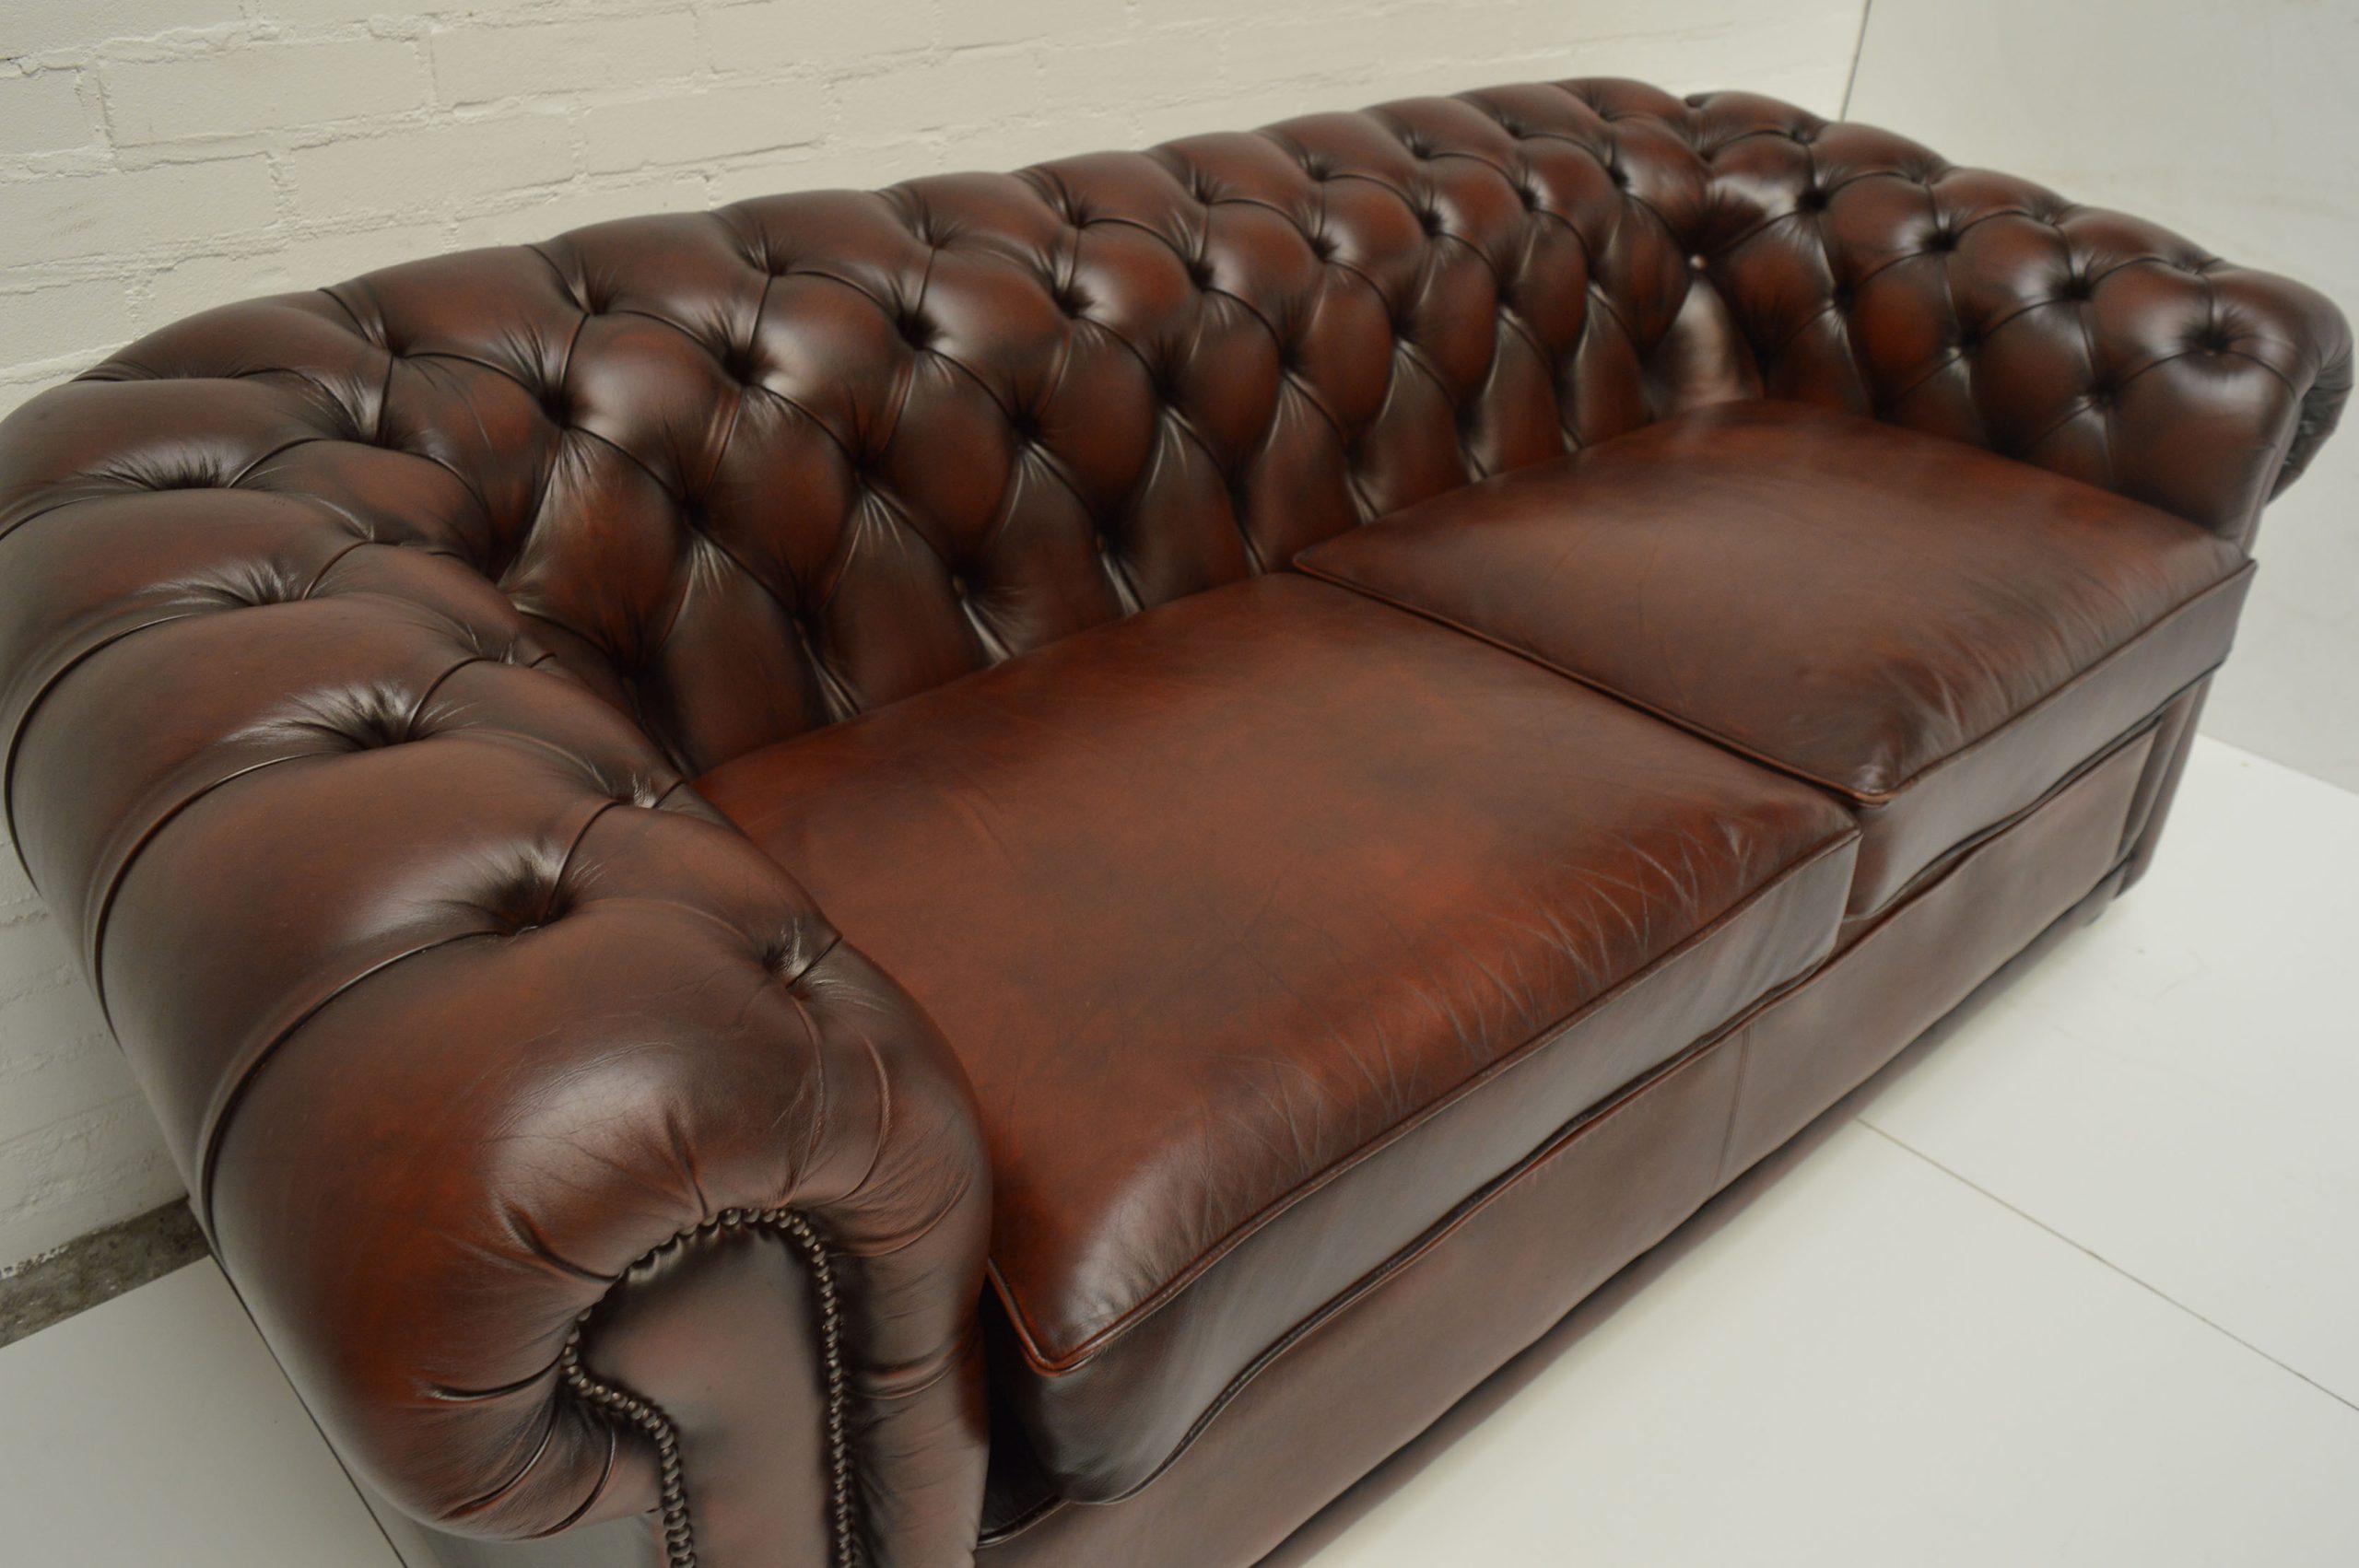 3 zits chesterfield gladde voorkant in ant. light rust